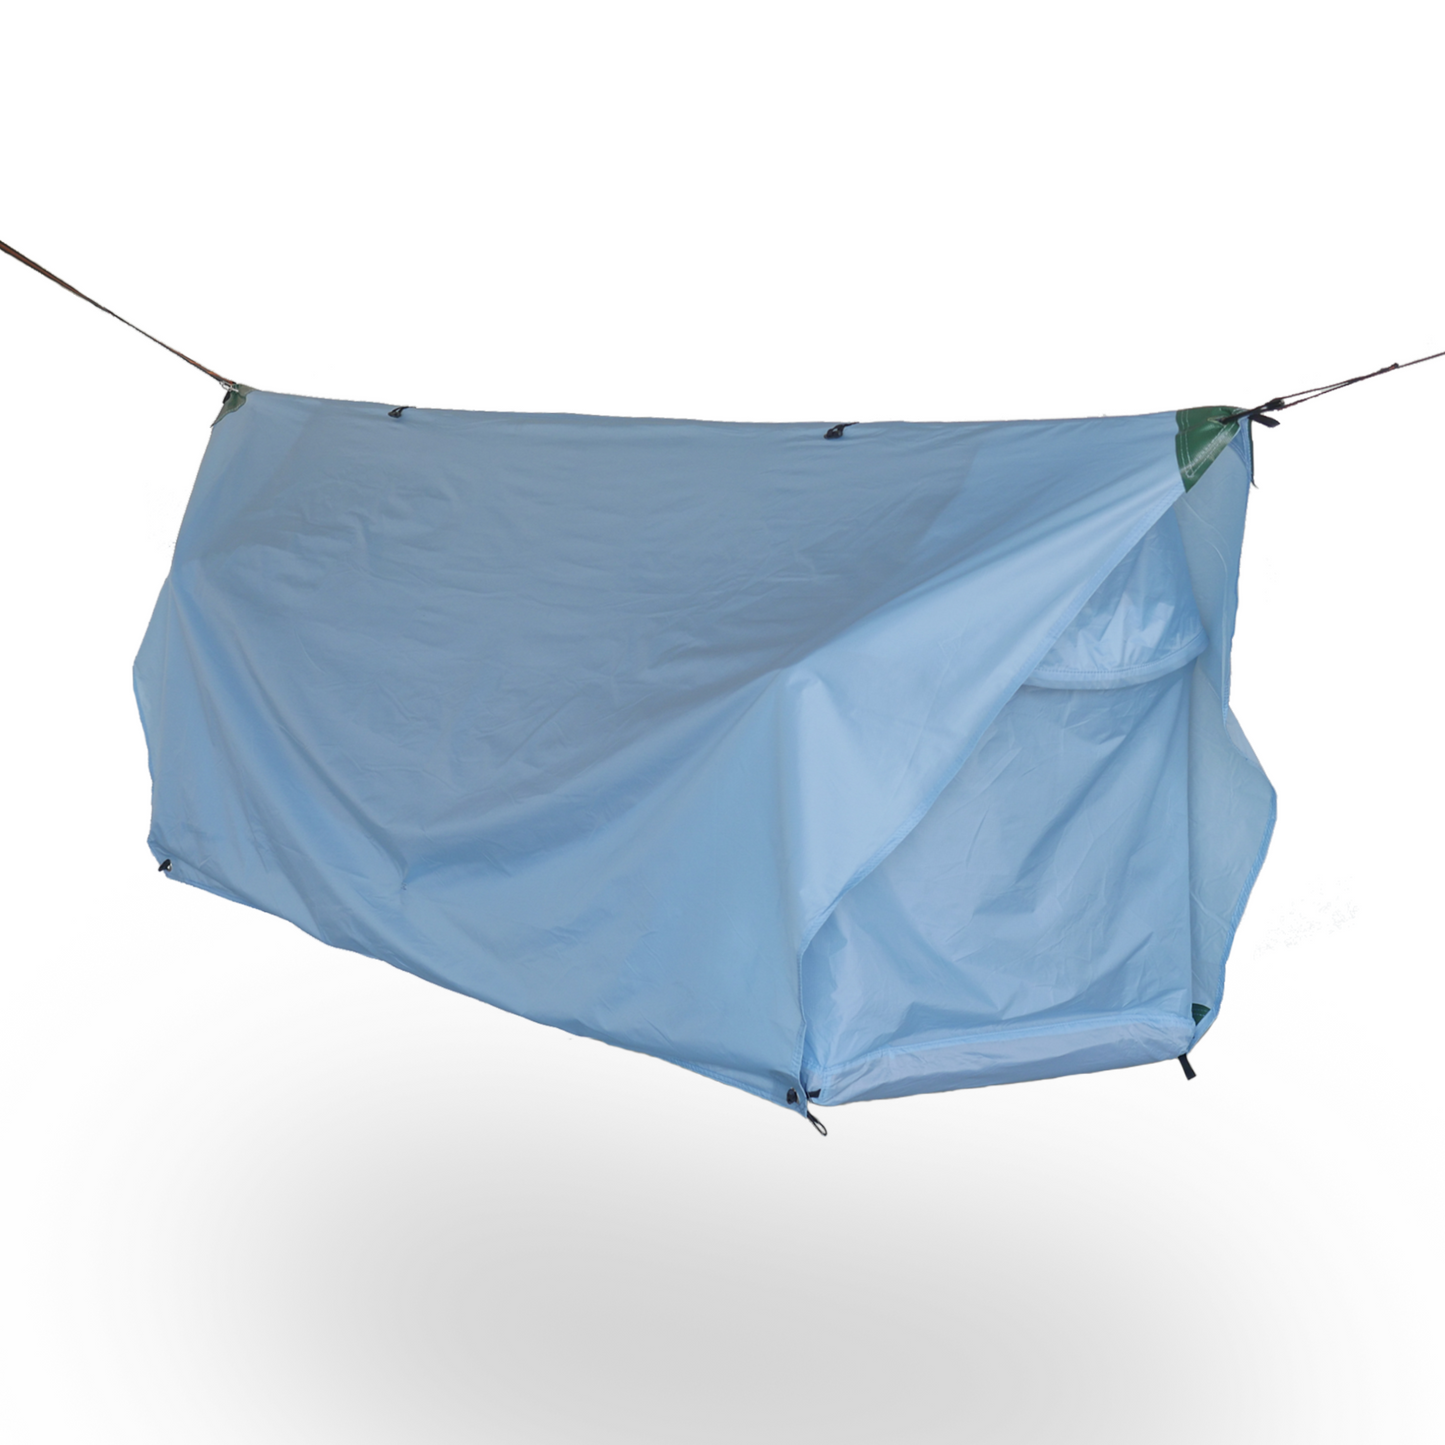 Blue hammock camping tent with durable rainfly